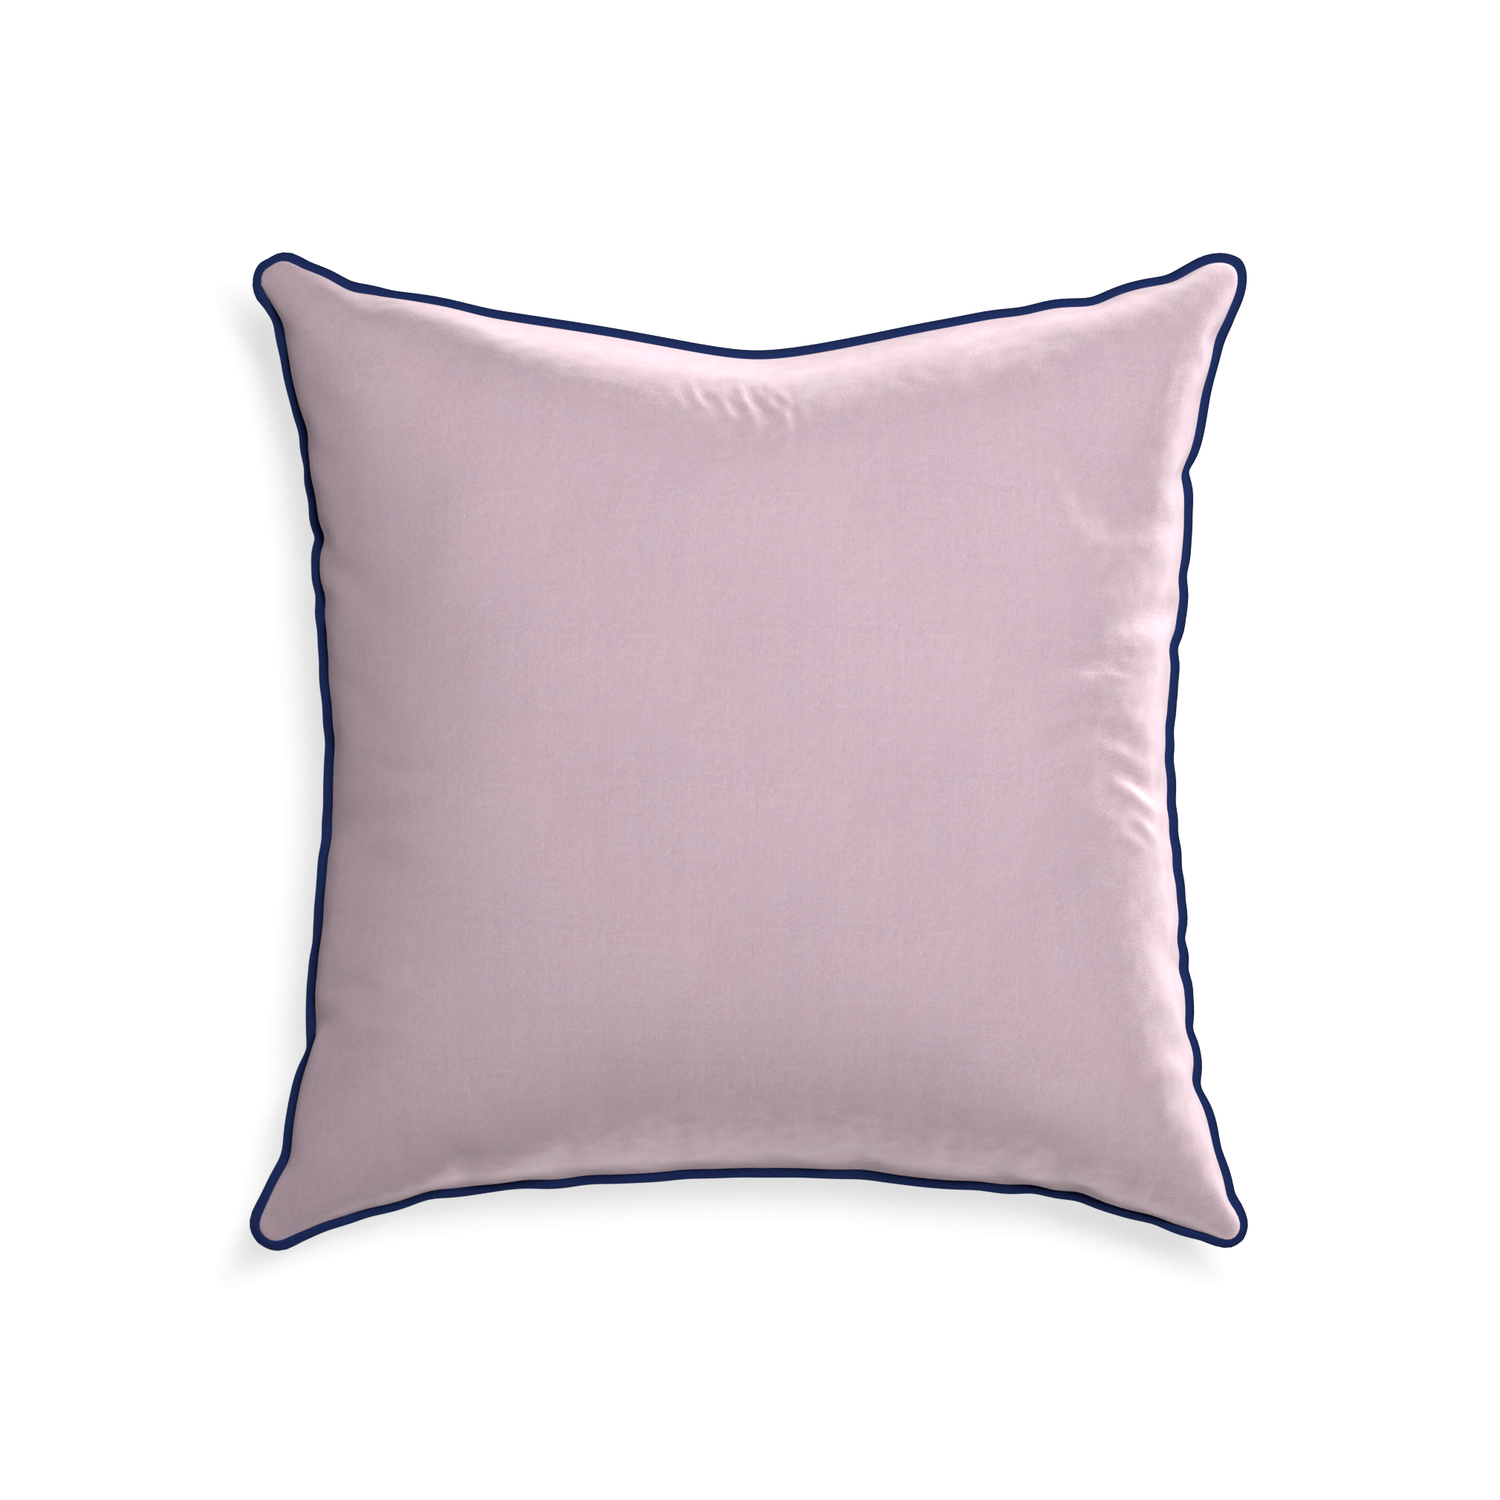 22-square lilac velvet custom pillow with midnight piping on white background